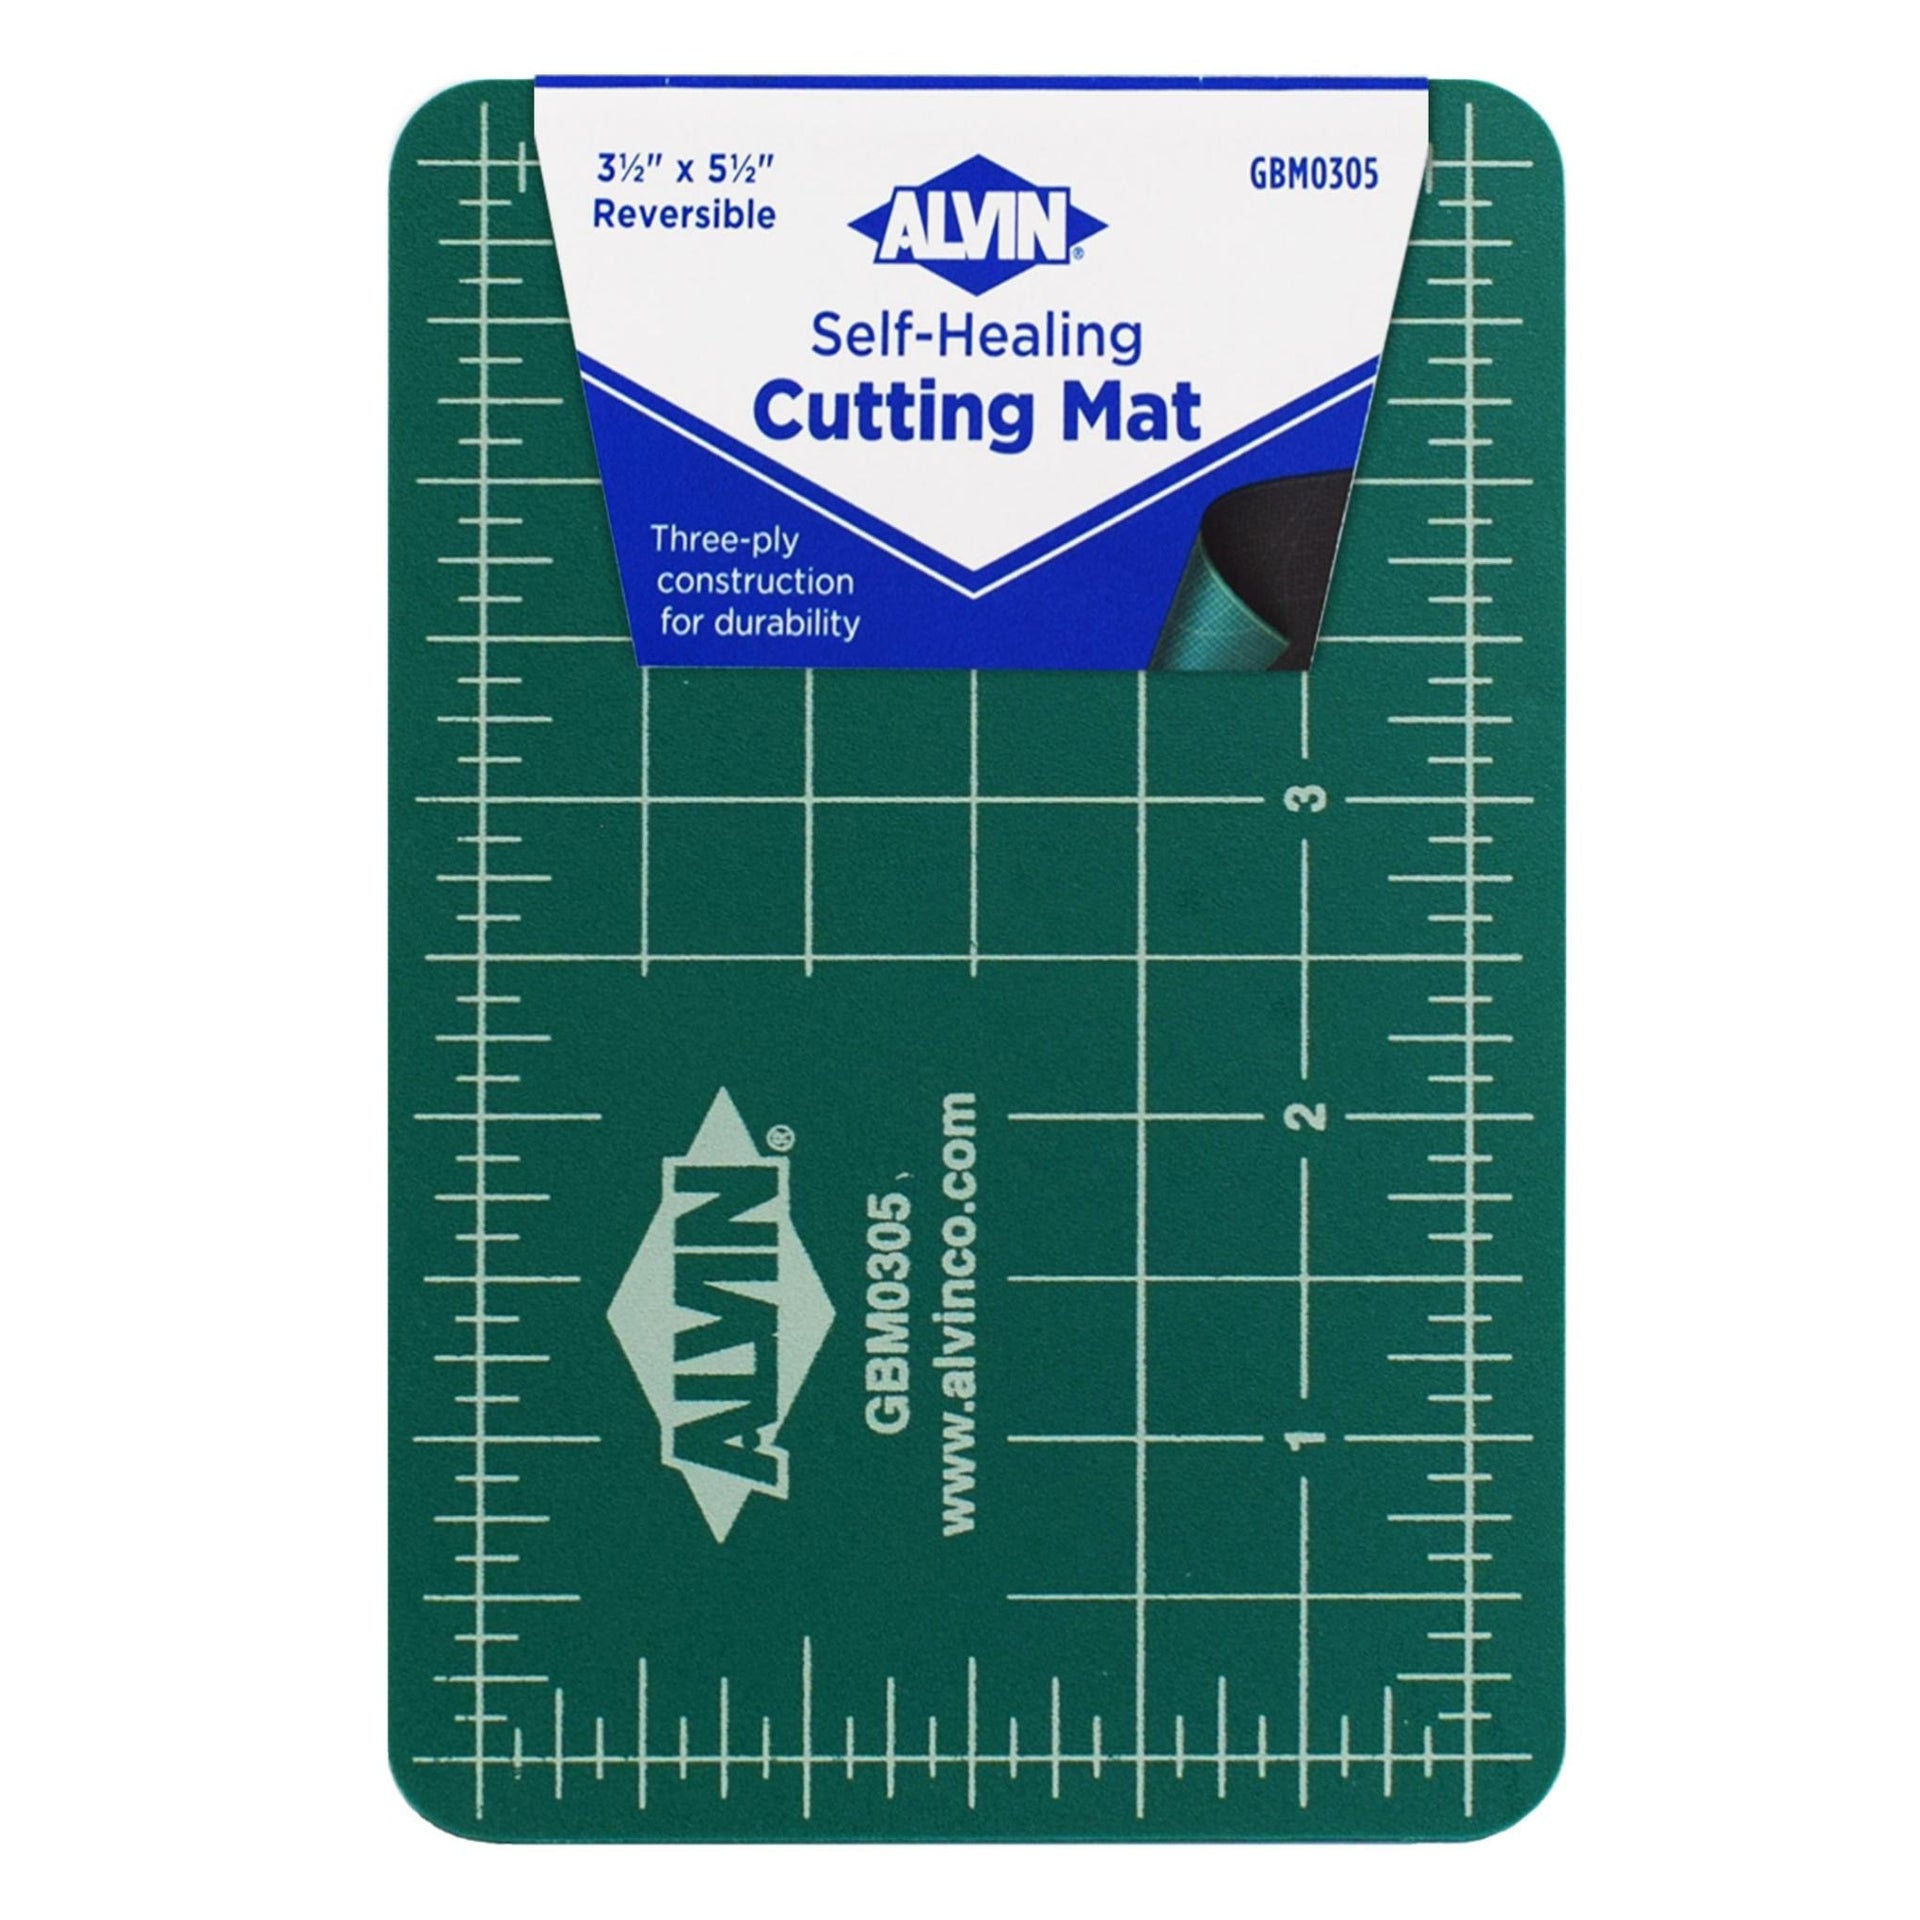 ALVIN Cutting Mat Professional Self-Healing 36x48 Model GBM3648 Large,  Green/Black Double-Sided, Gridded Rotary Cutting Board for Crafts, Sewing